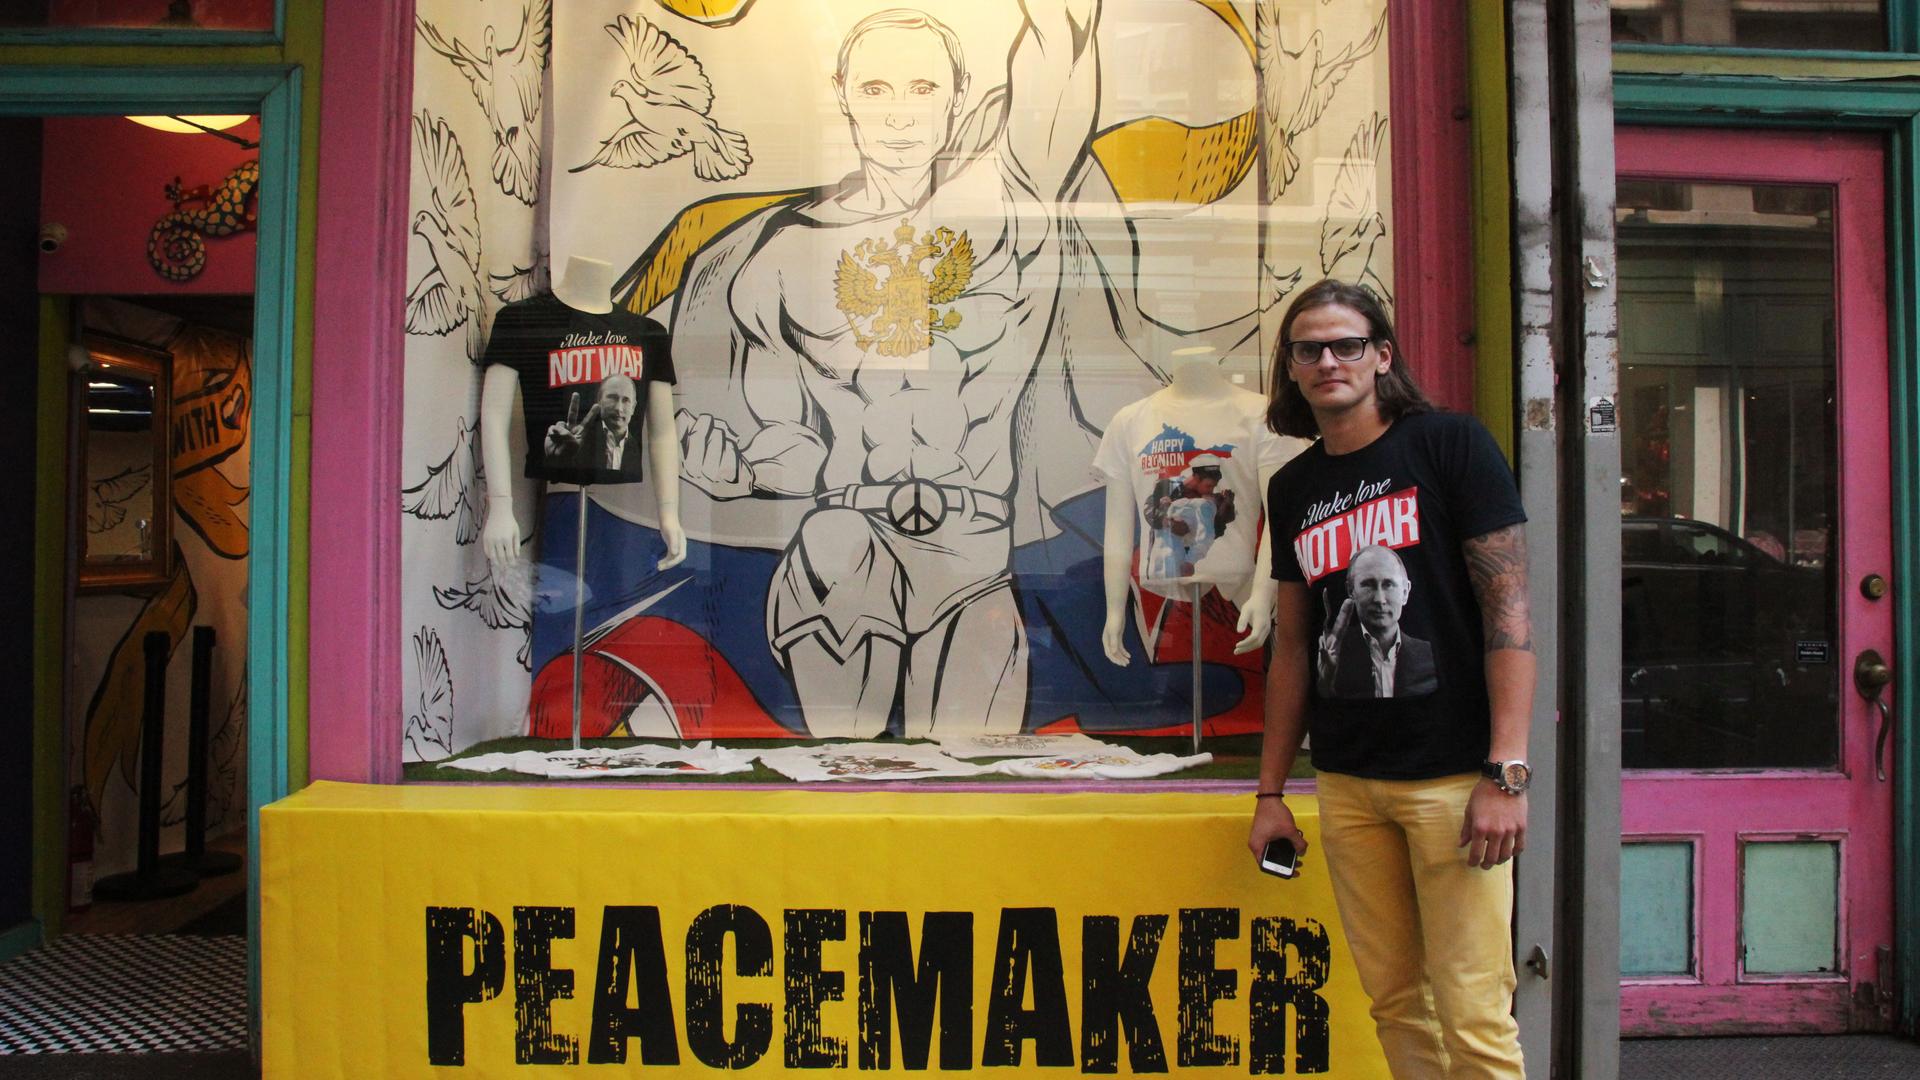 Julius Kacinskis outside of “Peacemaker,” the pop-up shop on East 20th Street in Manhattan where he sells Vladimir Putin t-shirts that he designed. “People portray Putin as a mean guy,” Kacinskis says, “so we gotta educate people."